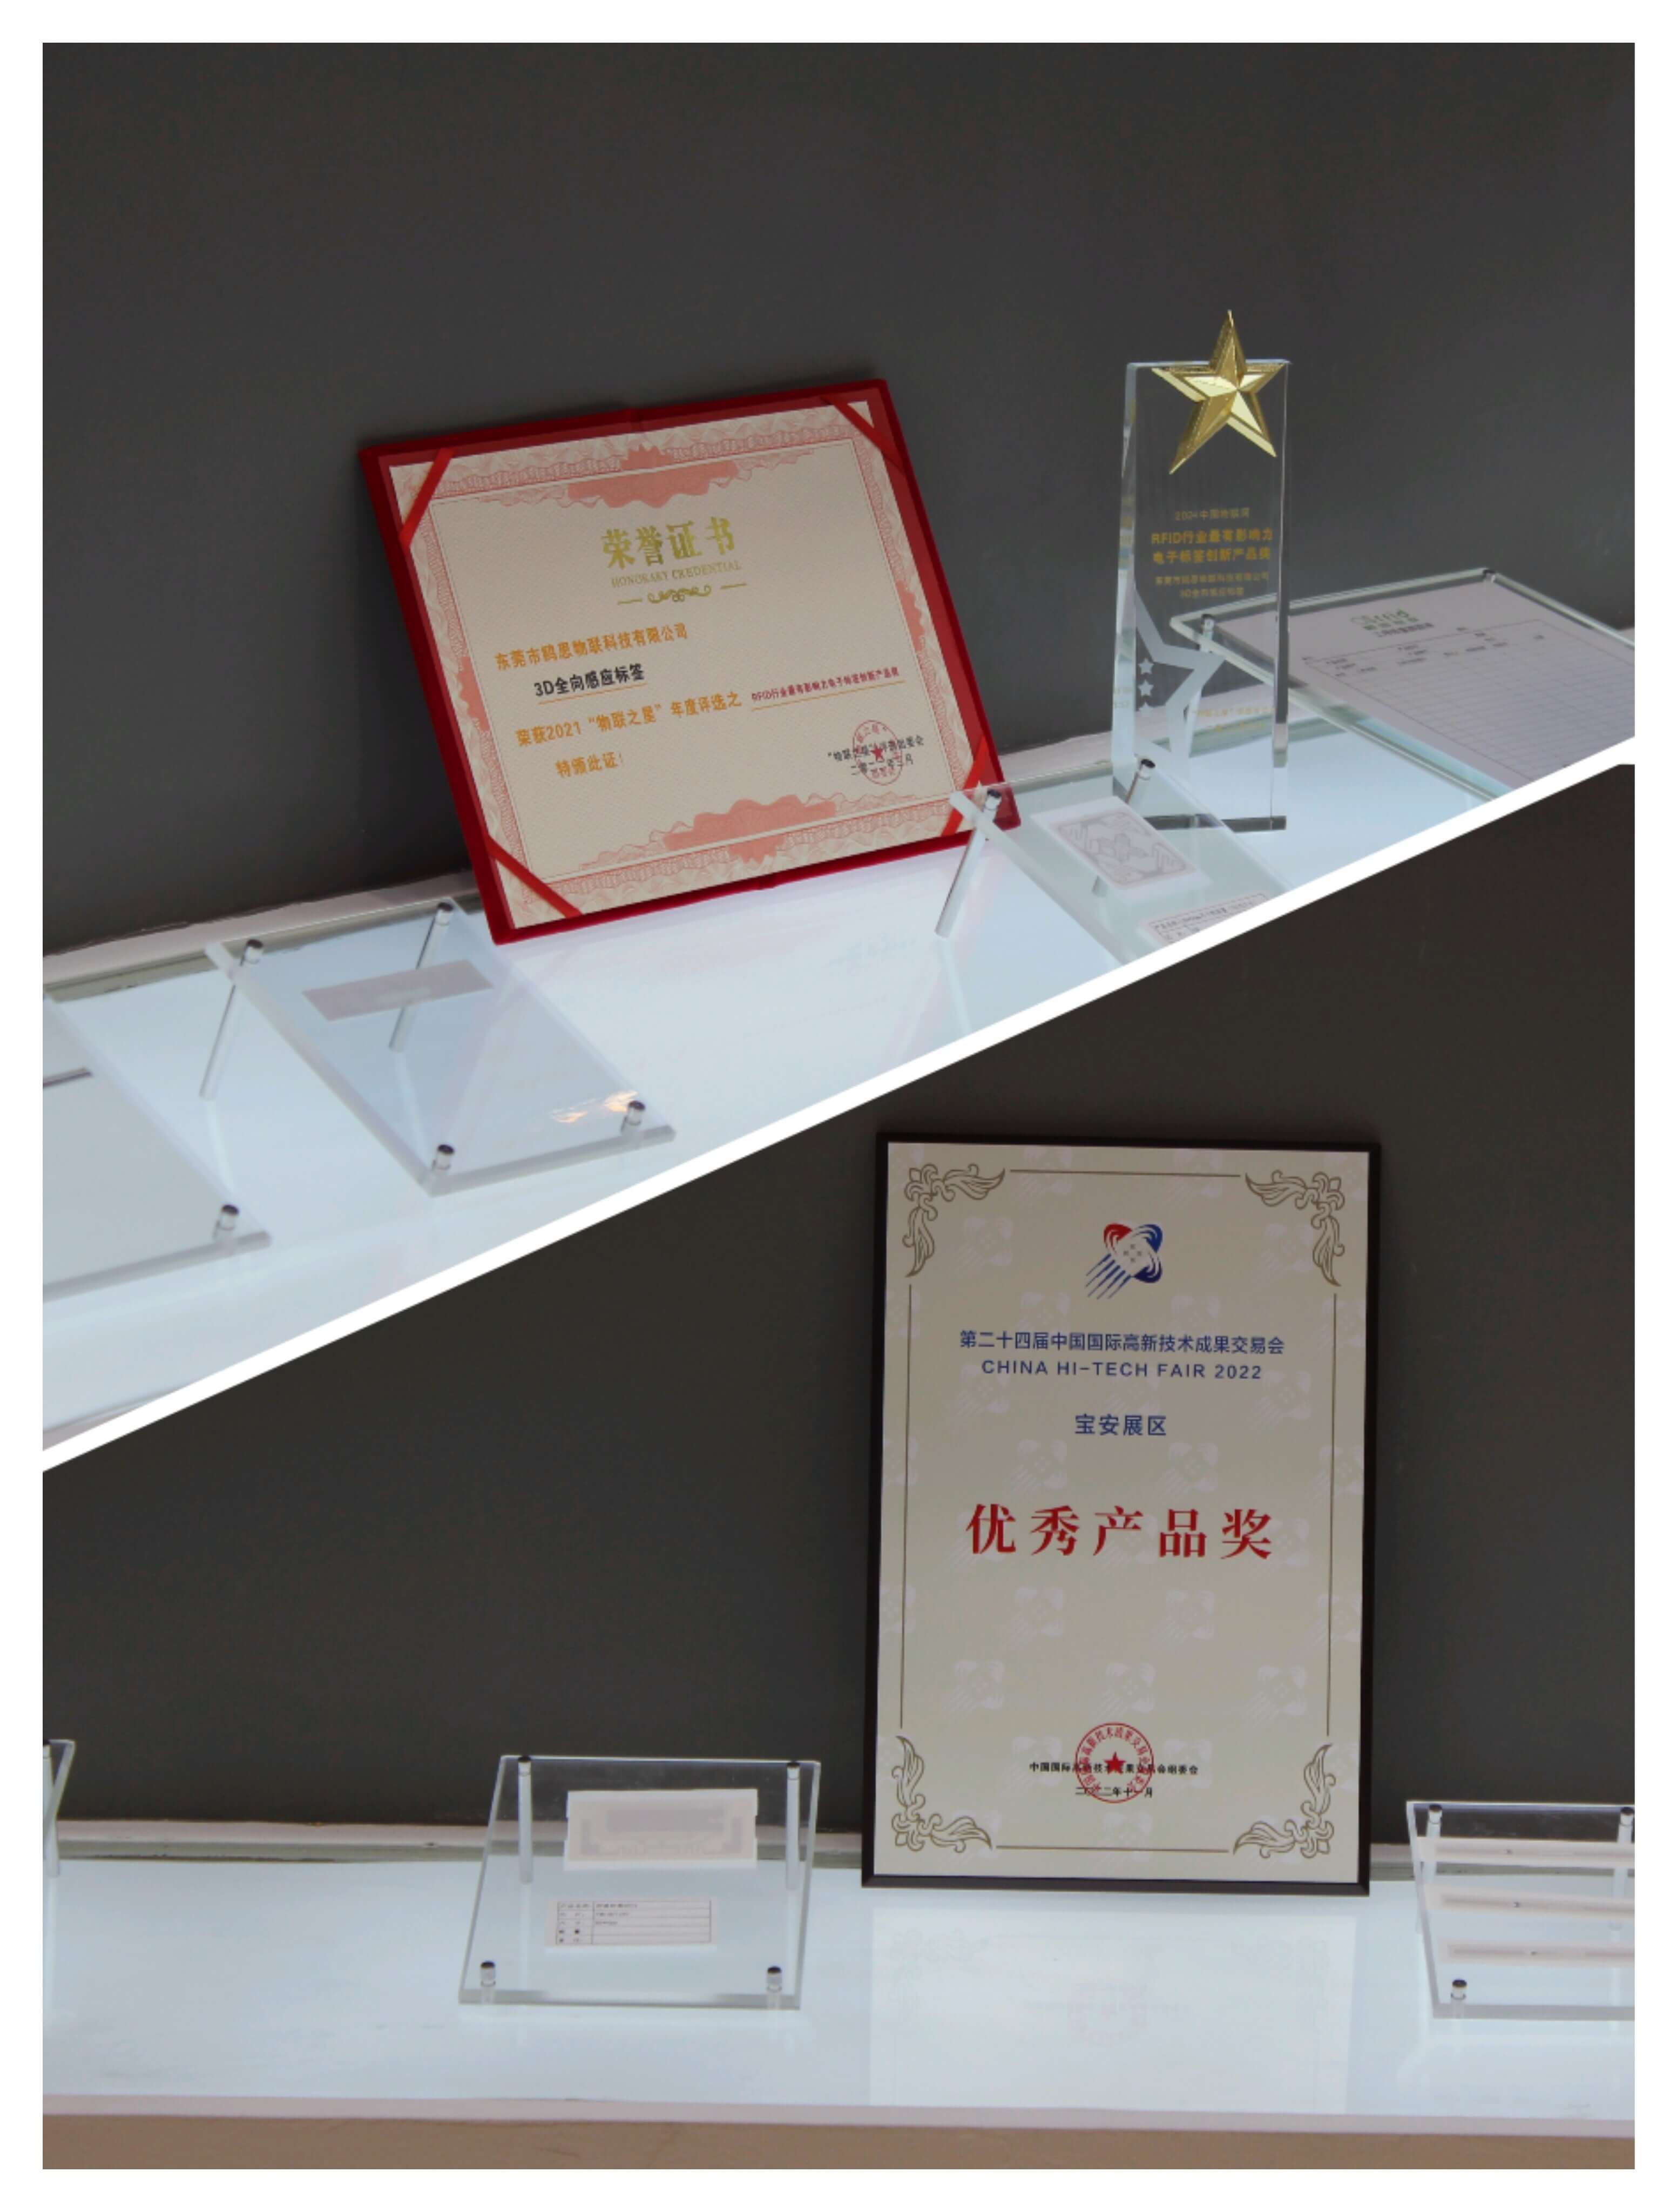 OSRFID won the 2021 IOT Star RFID Industry Most Influential Electronic Tag Innovation Product Award